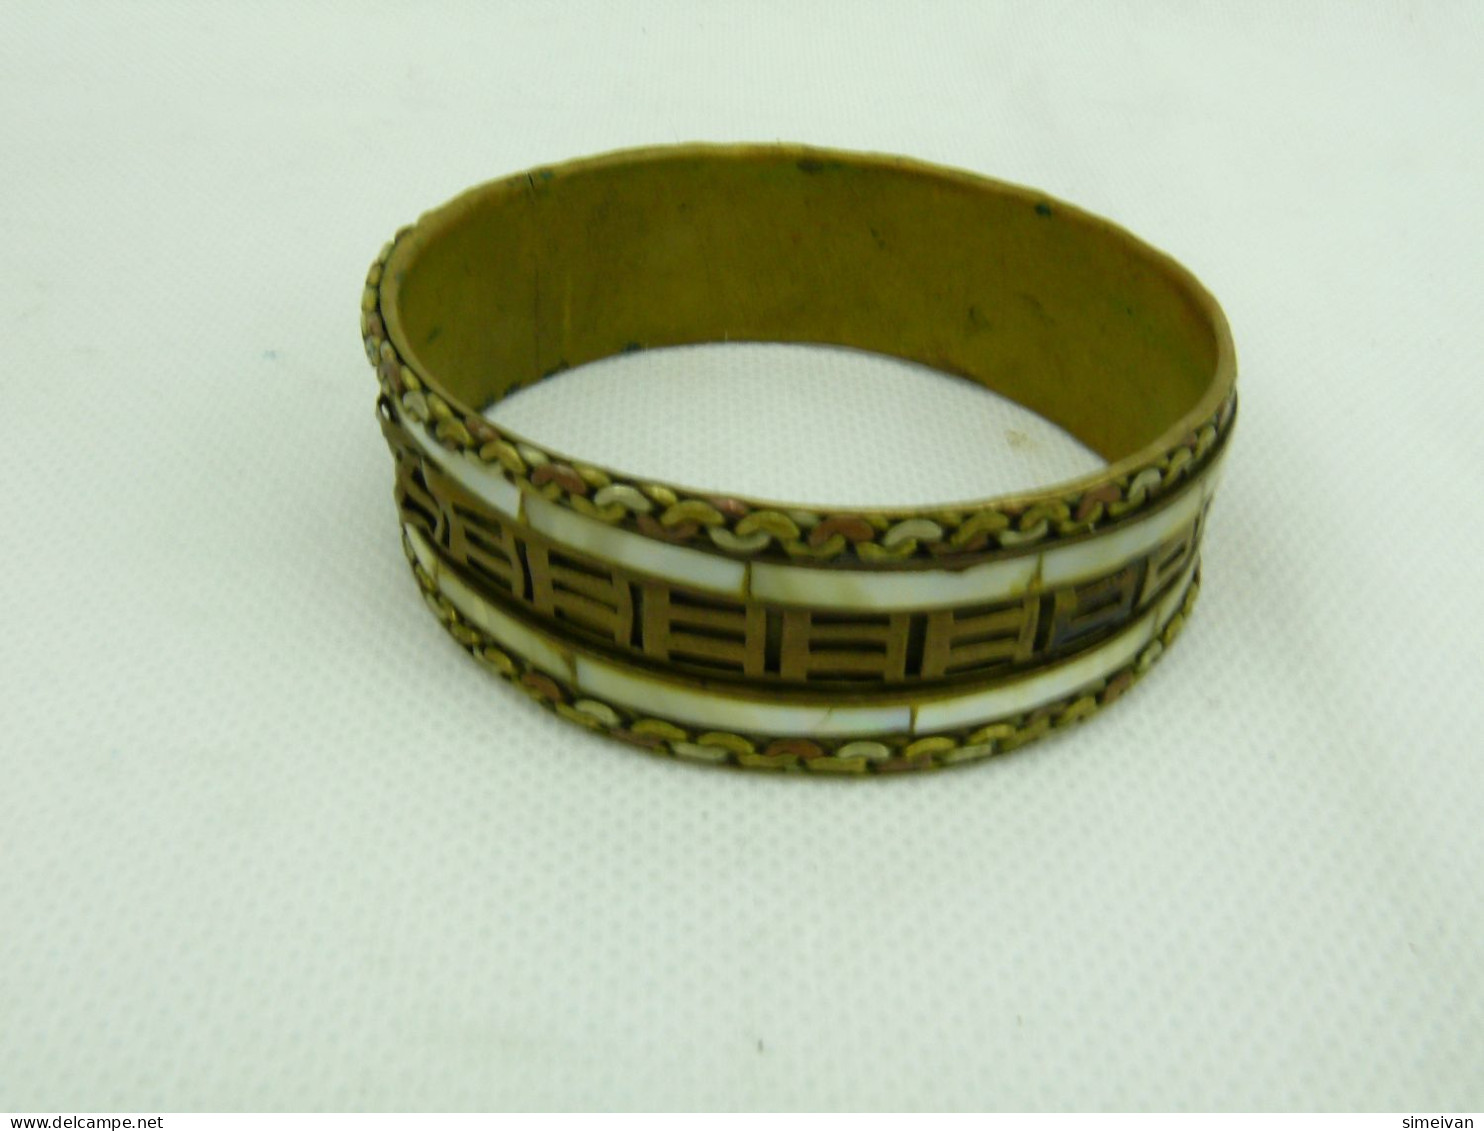 Beautiful Vintage Brass Bracelet With Inlaid Mother of Pearl #2292